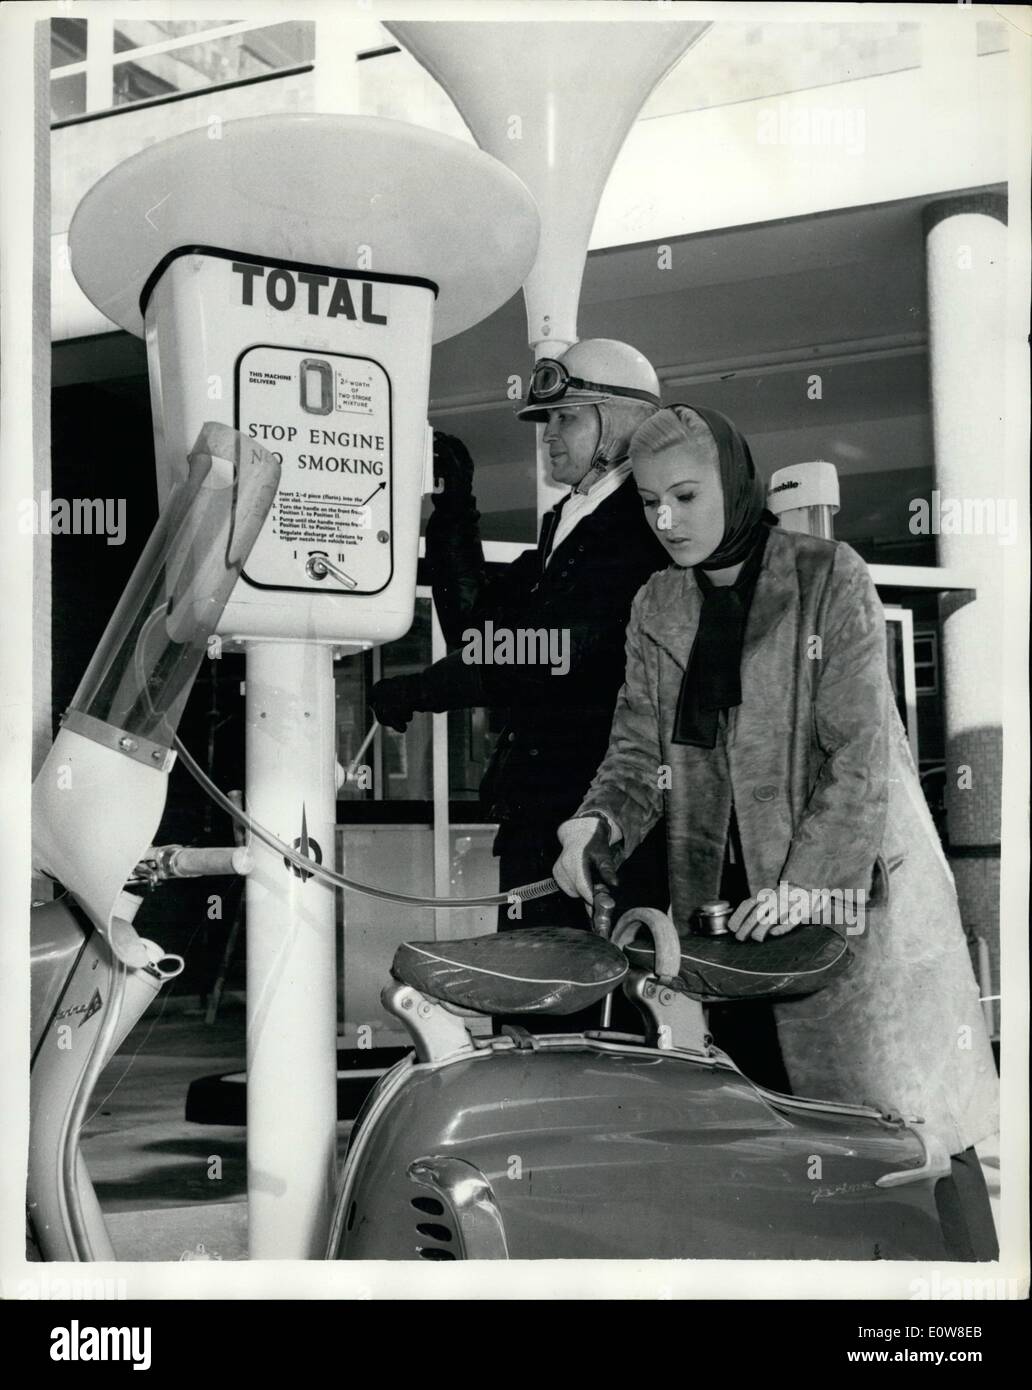 Nov. 11, 1961 - Self-Service Petrol Pump: For the first time in London at the new Total service station near Southwark Bridge, a special self-sevice pump provides ''help-yourself'' petroil mixture for mopeds and scooters. Users insert a two-shilling piece, turn a handle, thereby pumping the mixed fuel into a container on the dispenser. Three pints are obtained for 2s. Photo shows One of the first customers to use the new pump today, John Ebbrell, of Muswell Hill, inserts his money, while model Jenny Howard, of Kingston, puts the pump's nozzele in the tank Stock Photo